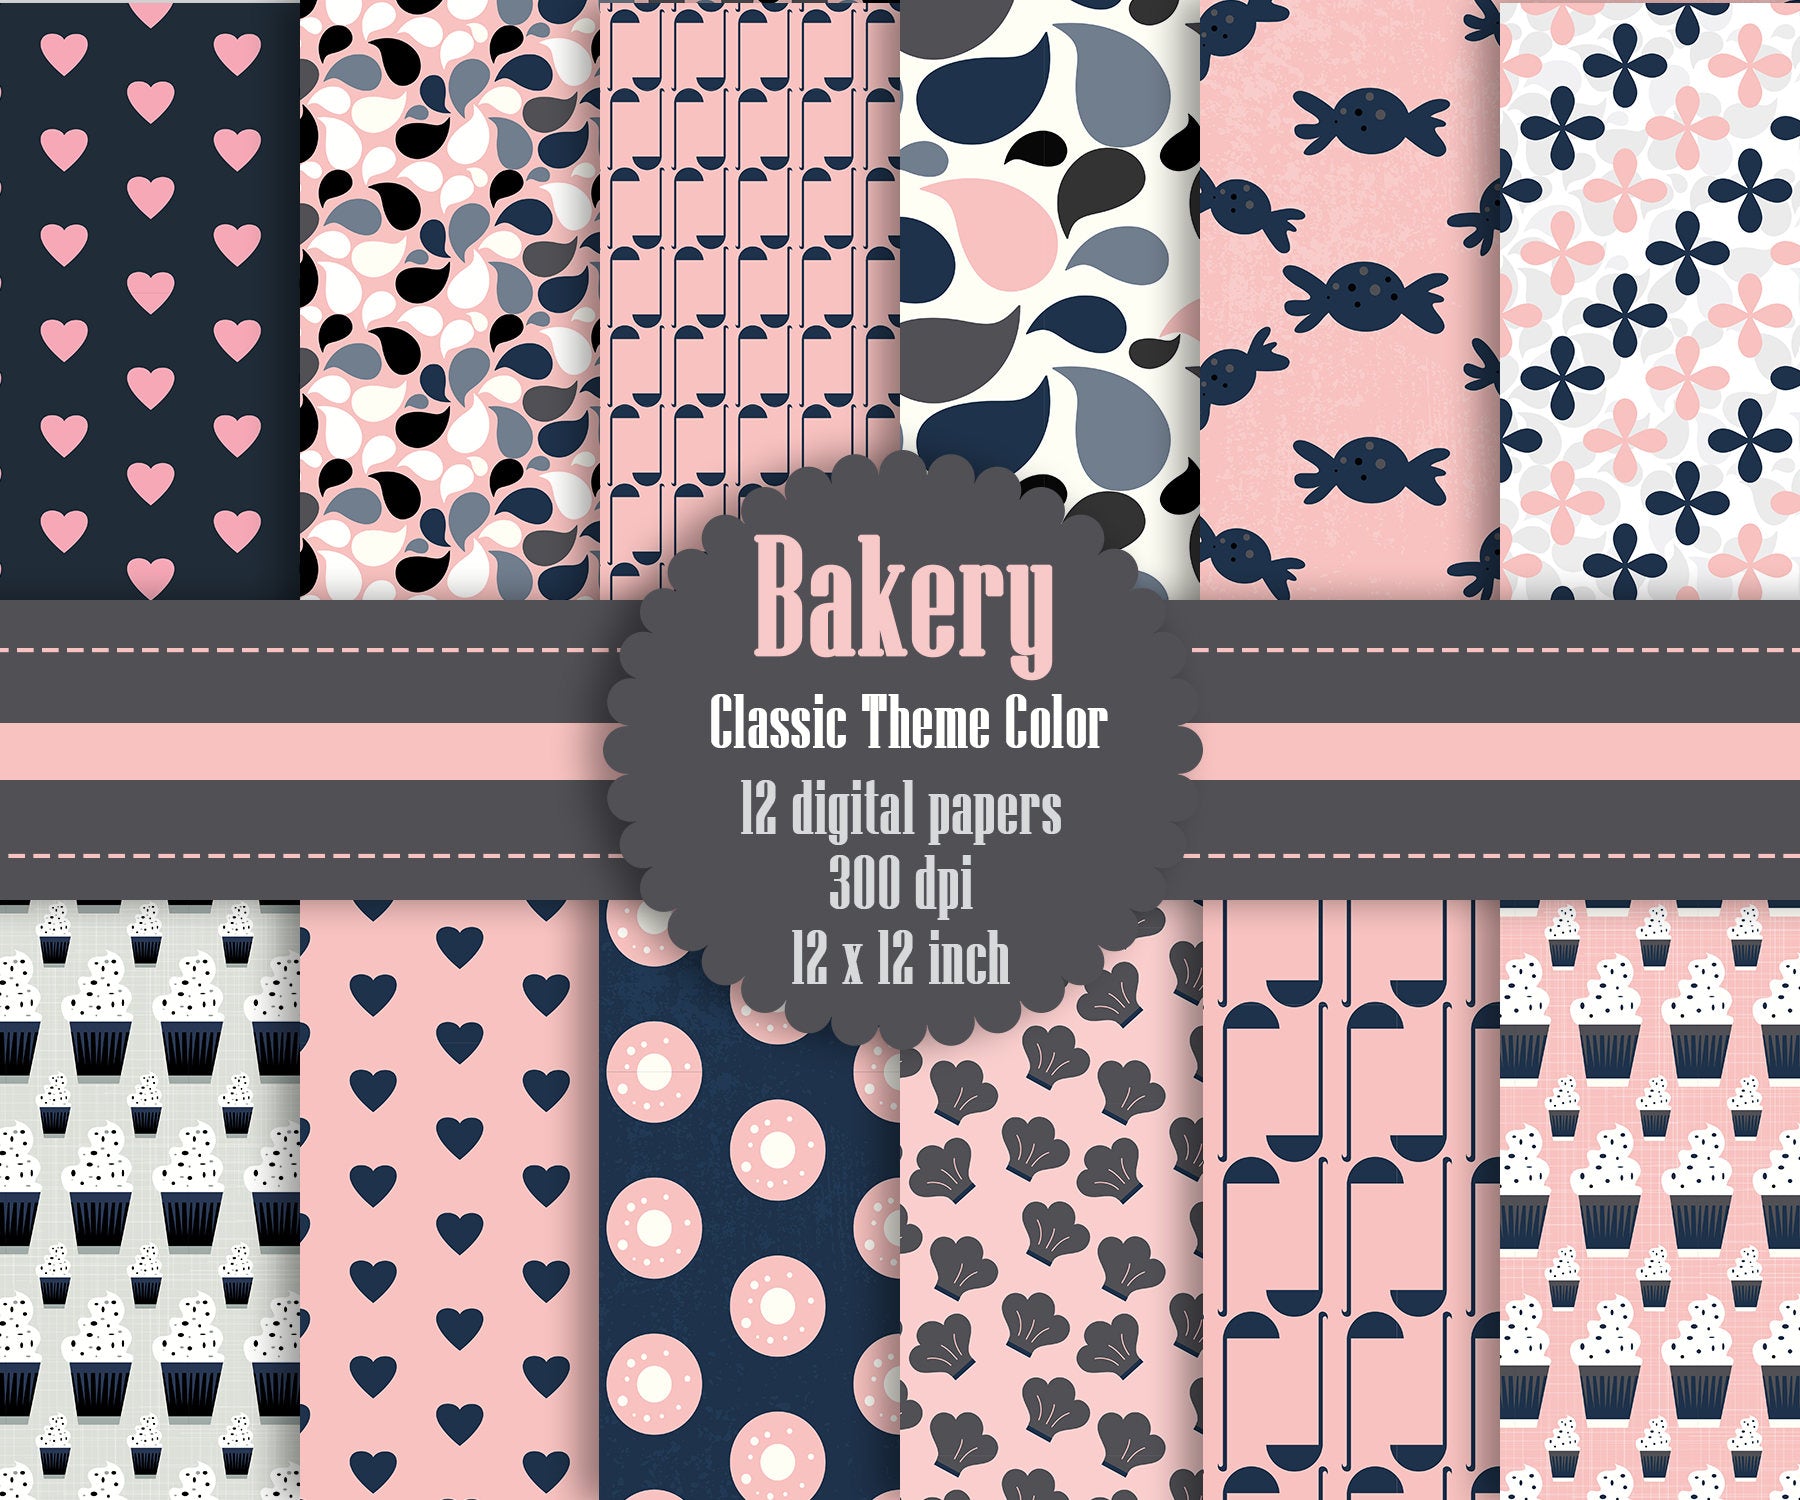 12 Bakery Digital Papers in Classic Theme Color in 12 inch, Instant Download, High Resolution 300 Dpi, Commercial Use